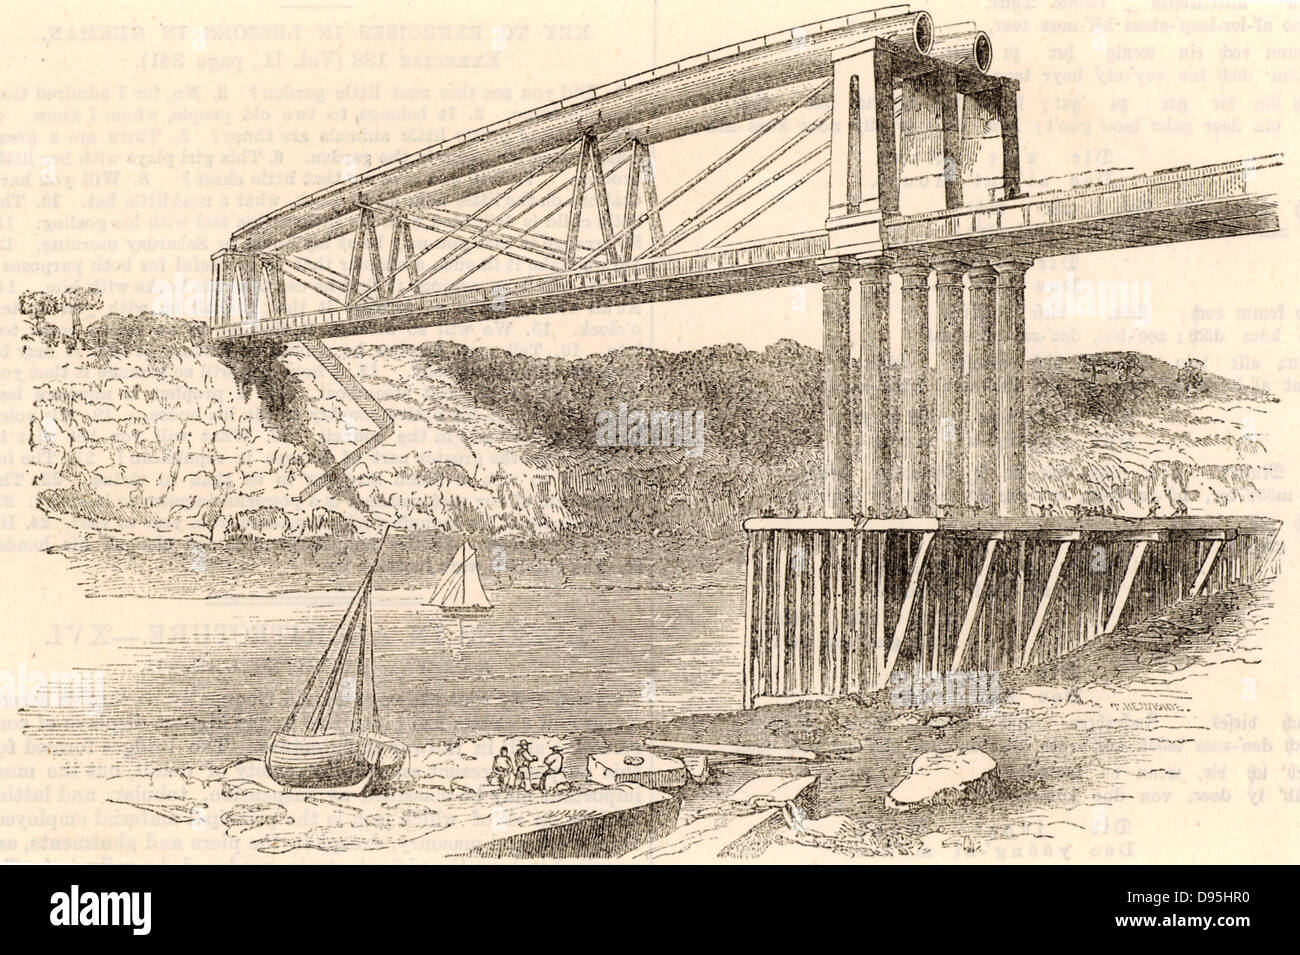 Wrought iron tubular trussed bridge over the river Wye at Chepstow, c1885.  This bridge, constructed 1849-1852, was an innovative design by Sambaed Kingdom Brunel (1806-1859) and the use of wrought iron tubular girders is considered to be a dummy run for his last great masterpiece, the Royal Albert bridge over the Tamar at Saltash.   The Chepstow bridge carried the South Wales Railway over the Wye. Brunel was engineer to the railway.   From 'The Popular Educator'. (London, c1885). Stock Photo